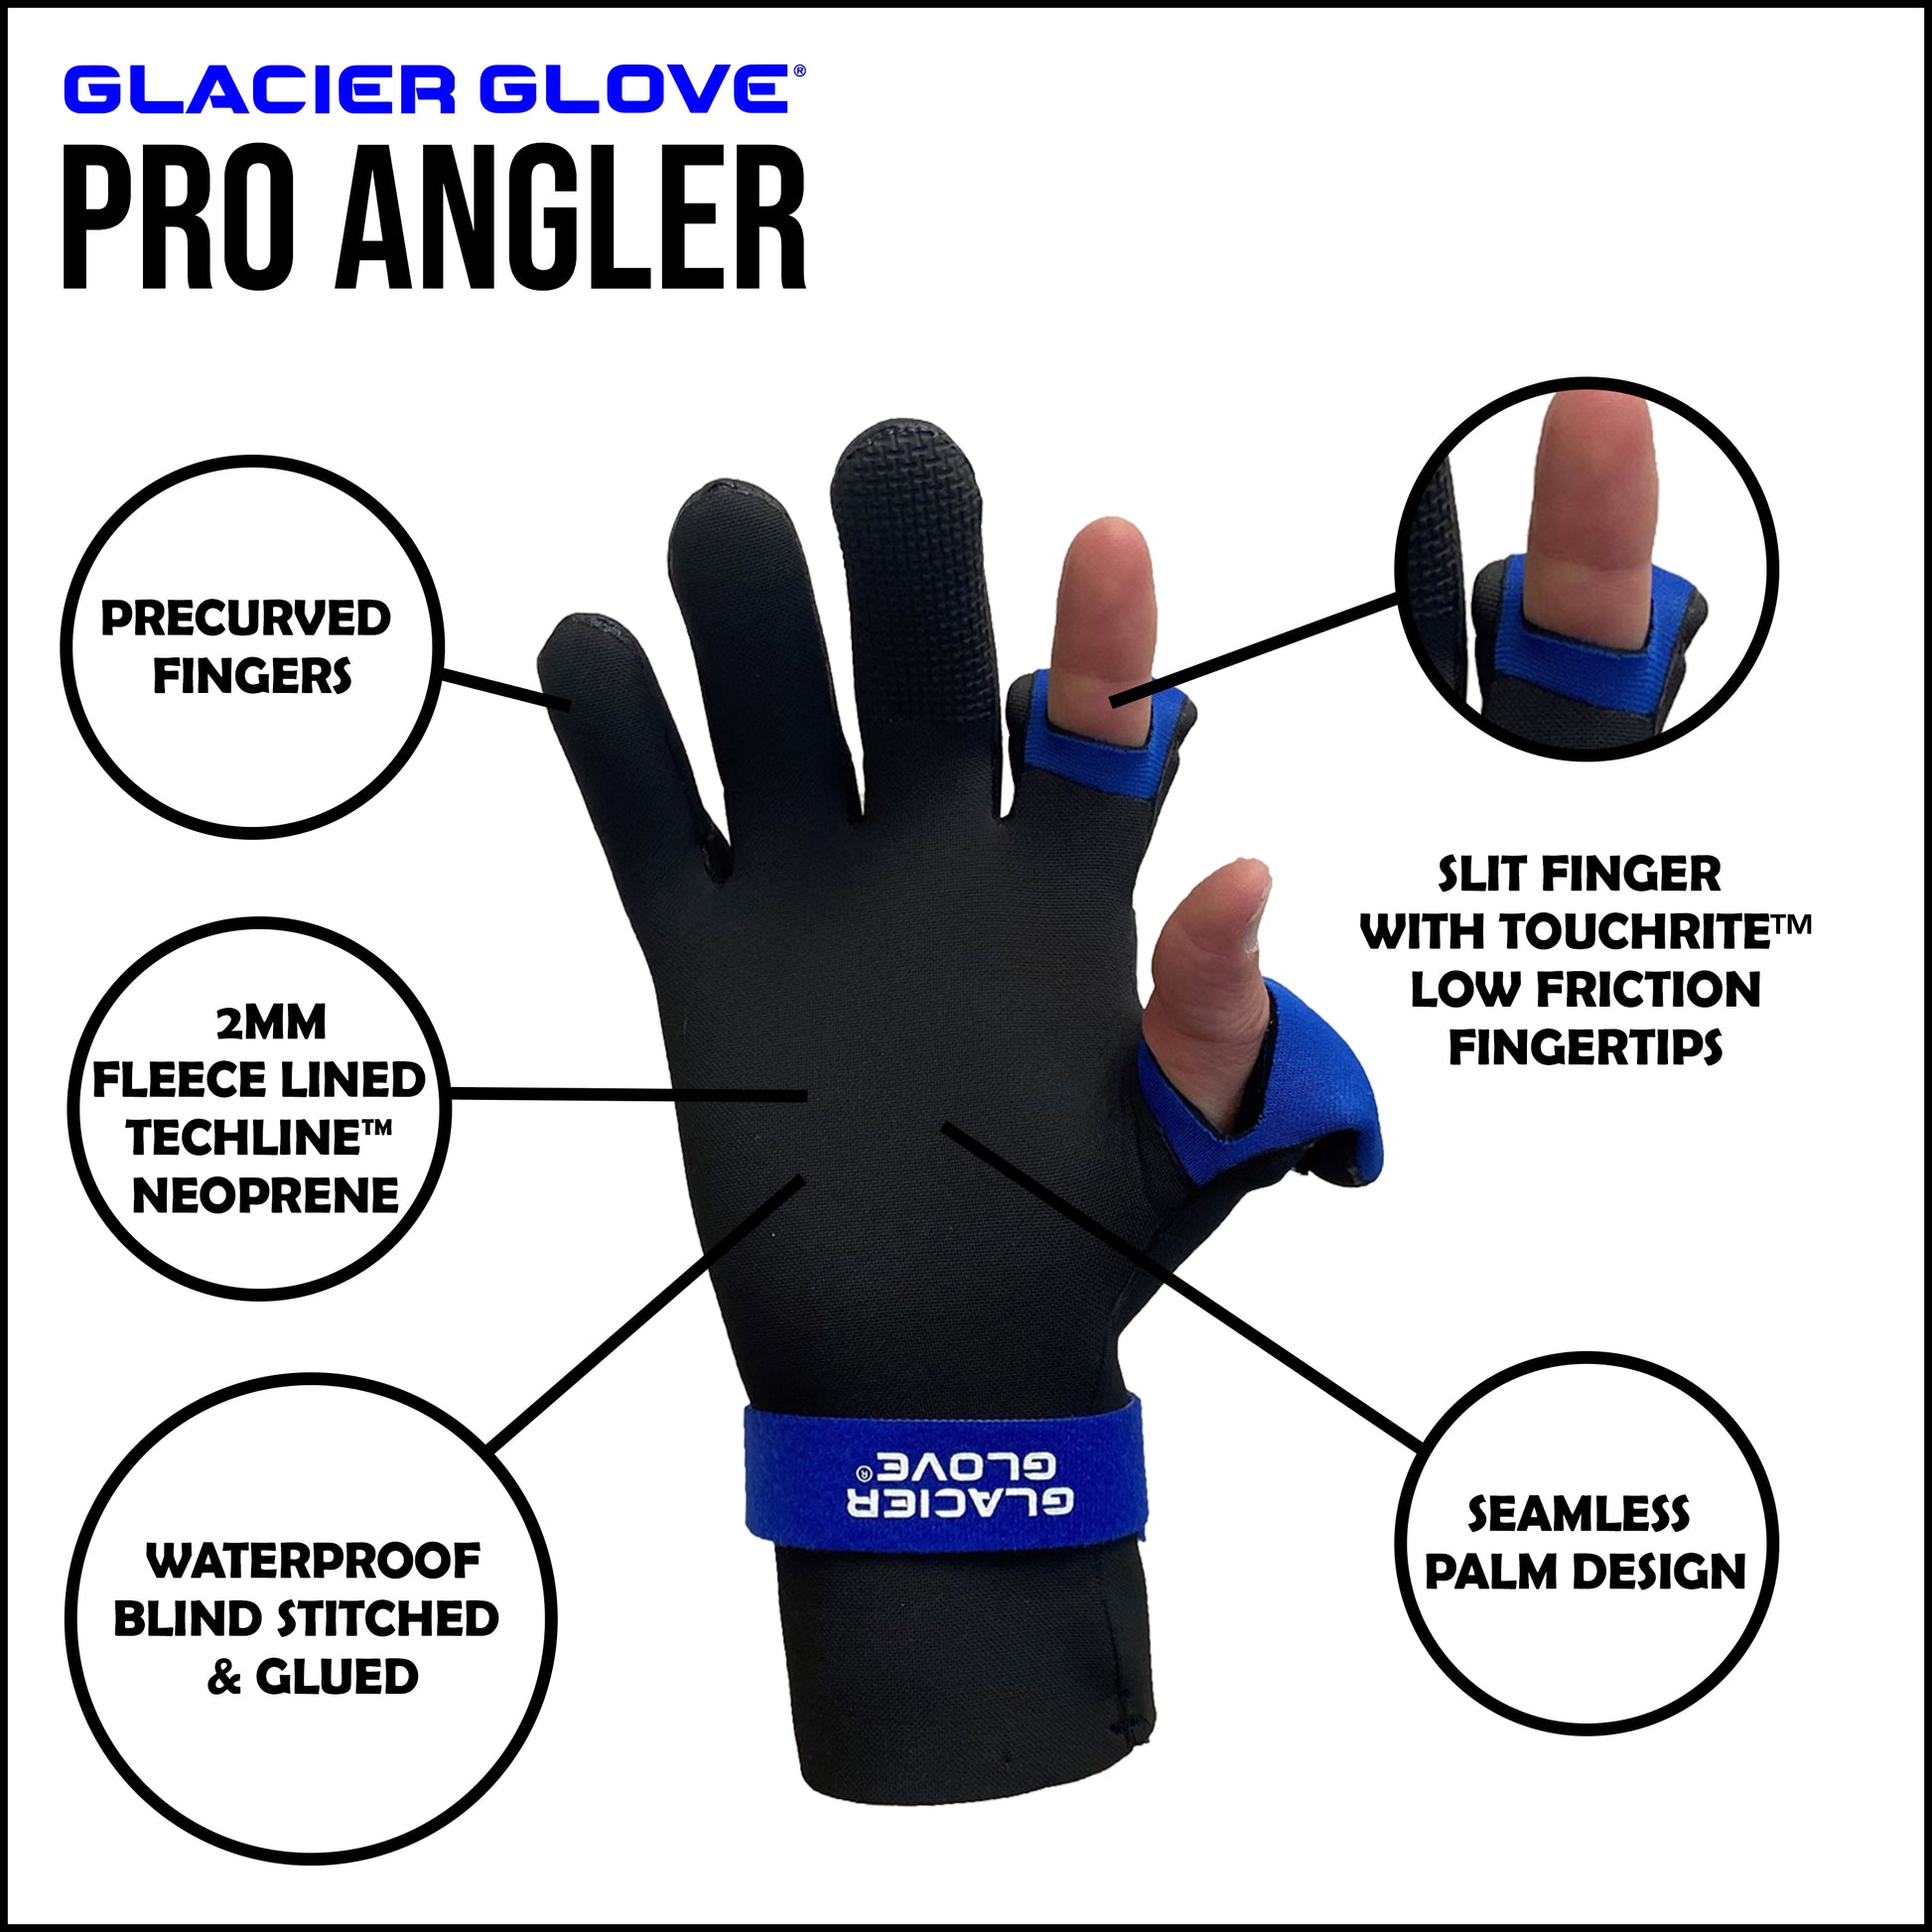 ARCLIBER Fishing Glove for Men with Magnet Release, Puncture